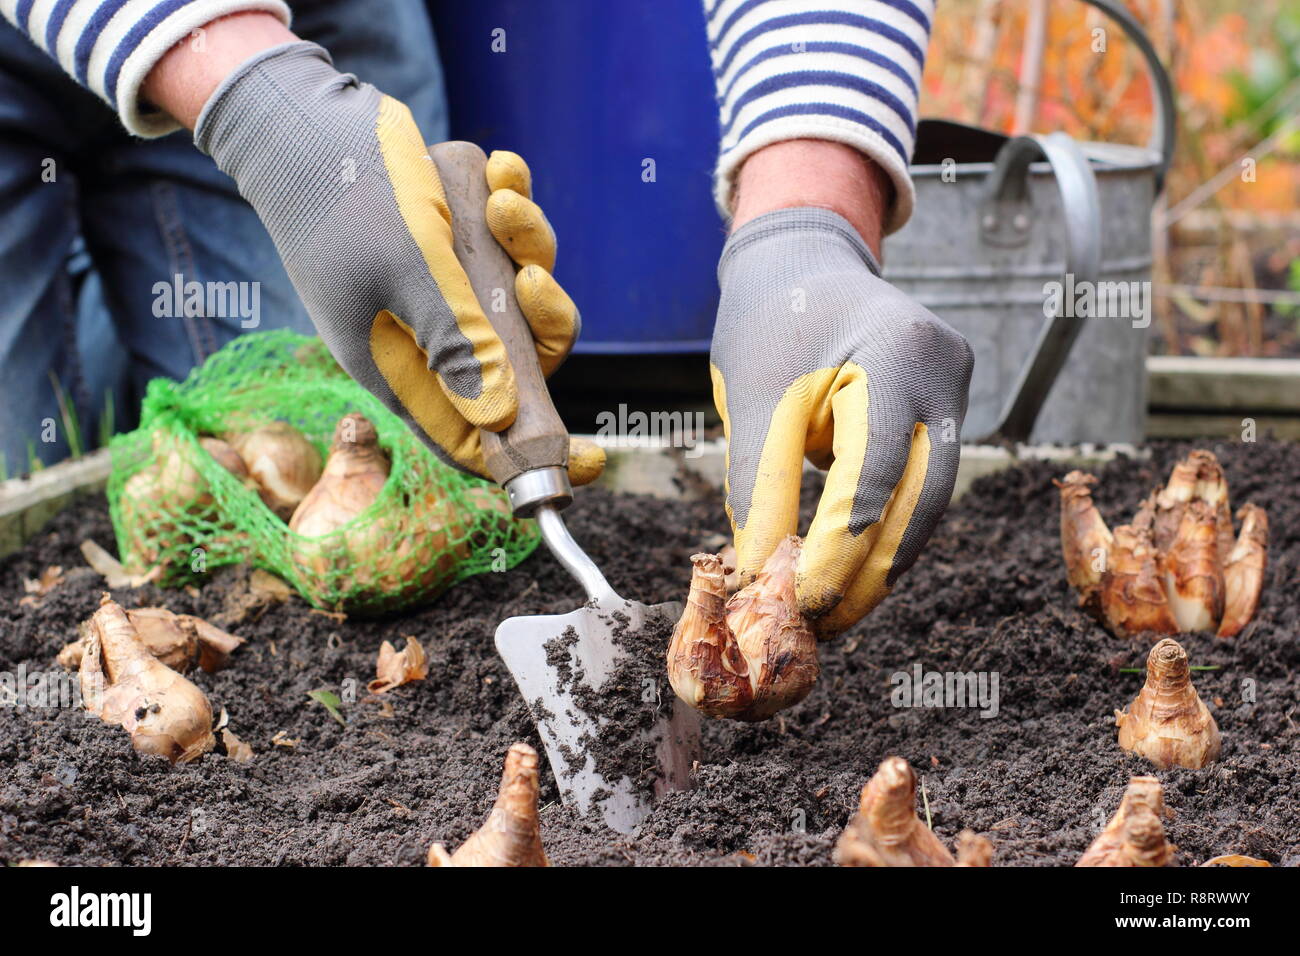 Narcissus. Planting daffodil bulbs with a hand trowel for spring, November, UK Stock Photo